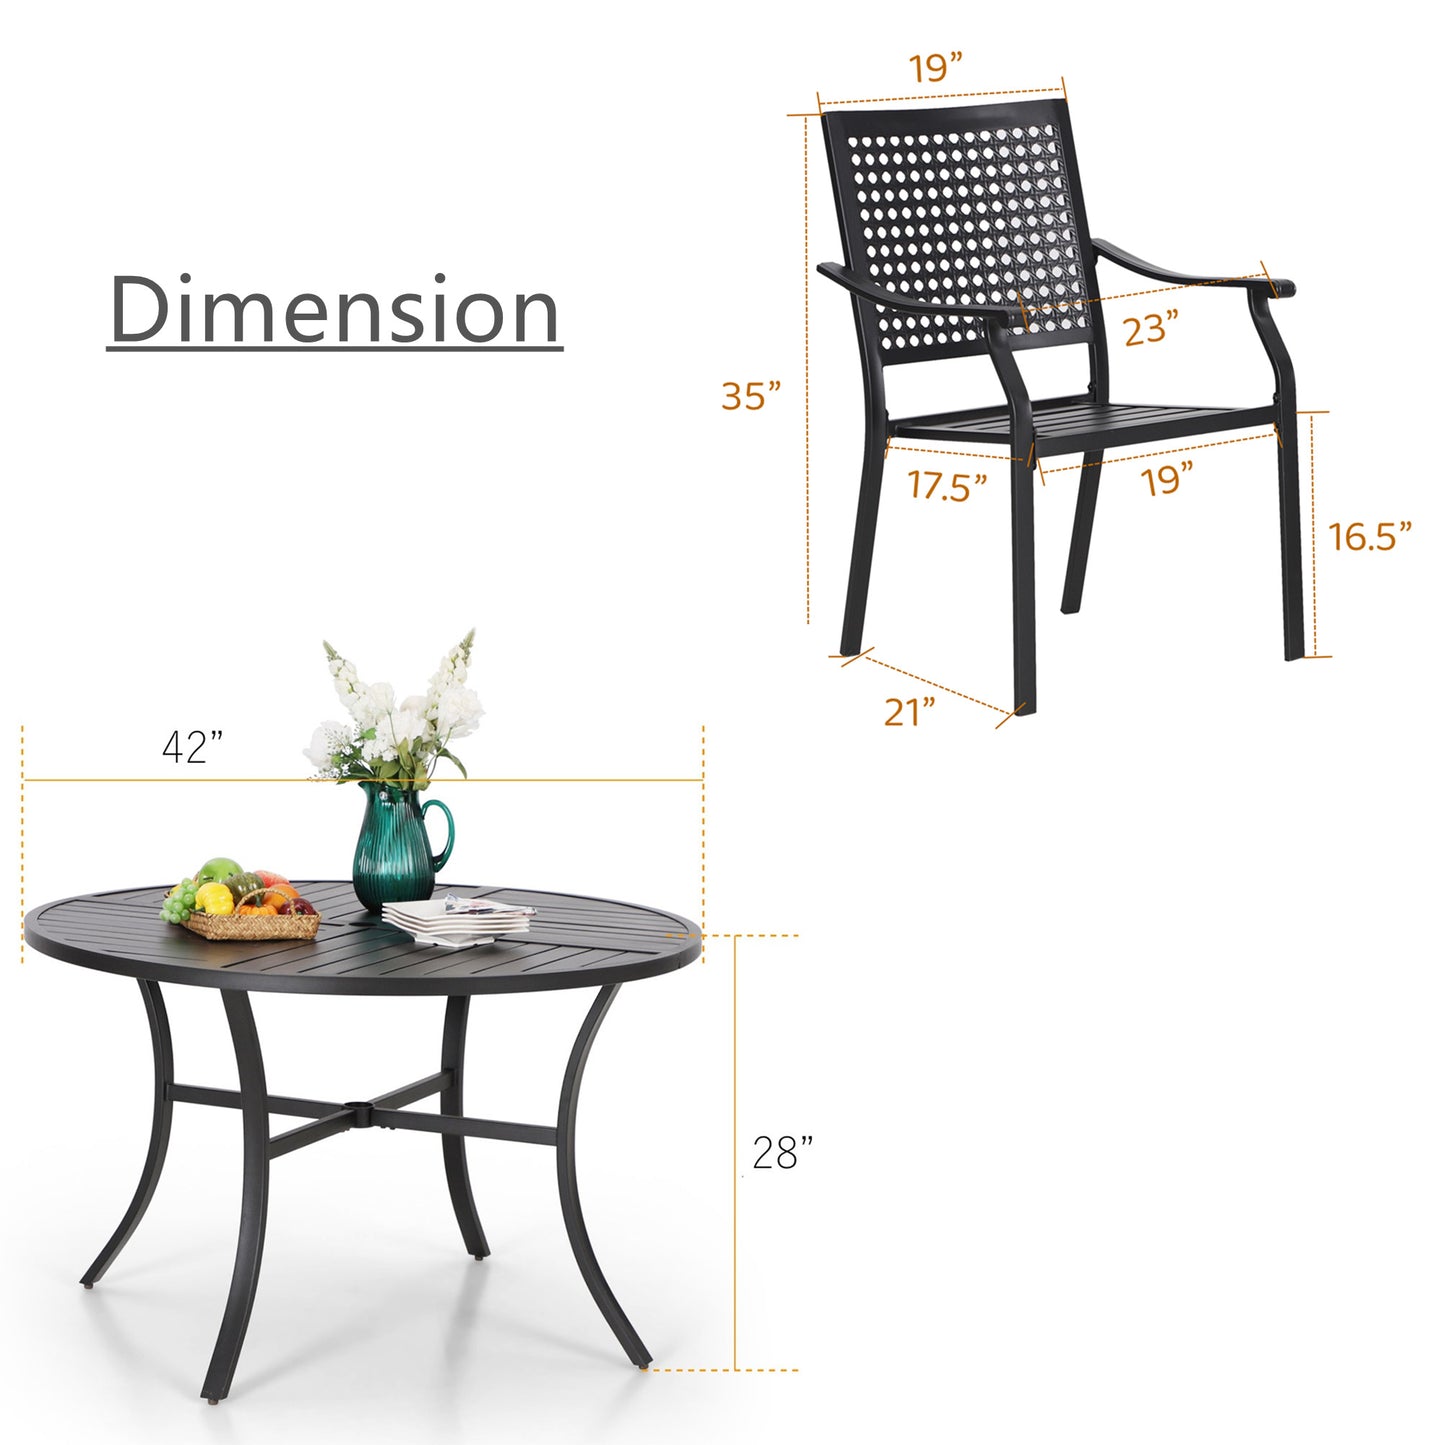 Sophia & William 5 Pieces Patio Outdoor Dining Set Metal Stackable Chairs and Round Table,Black